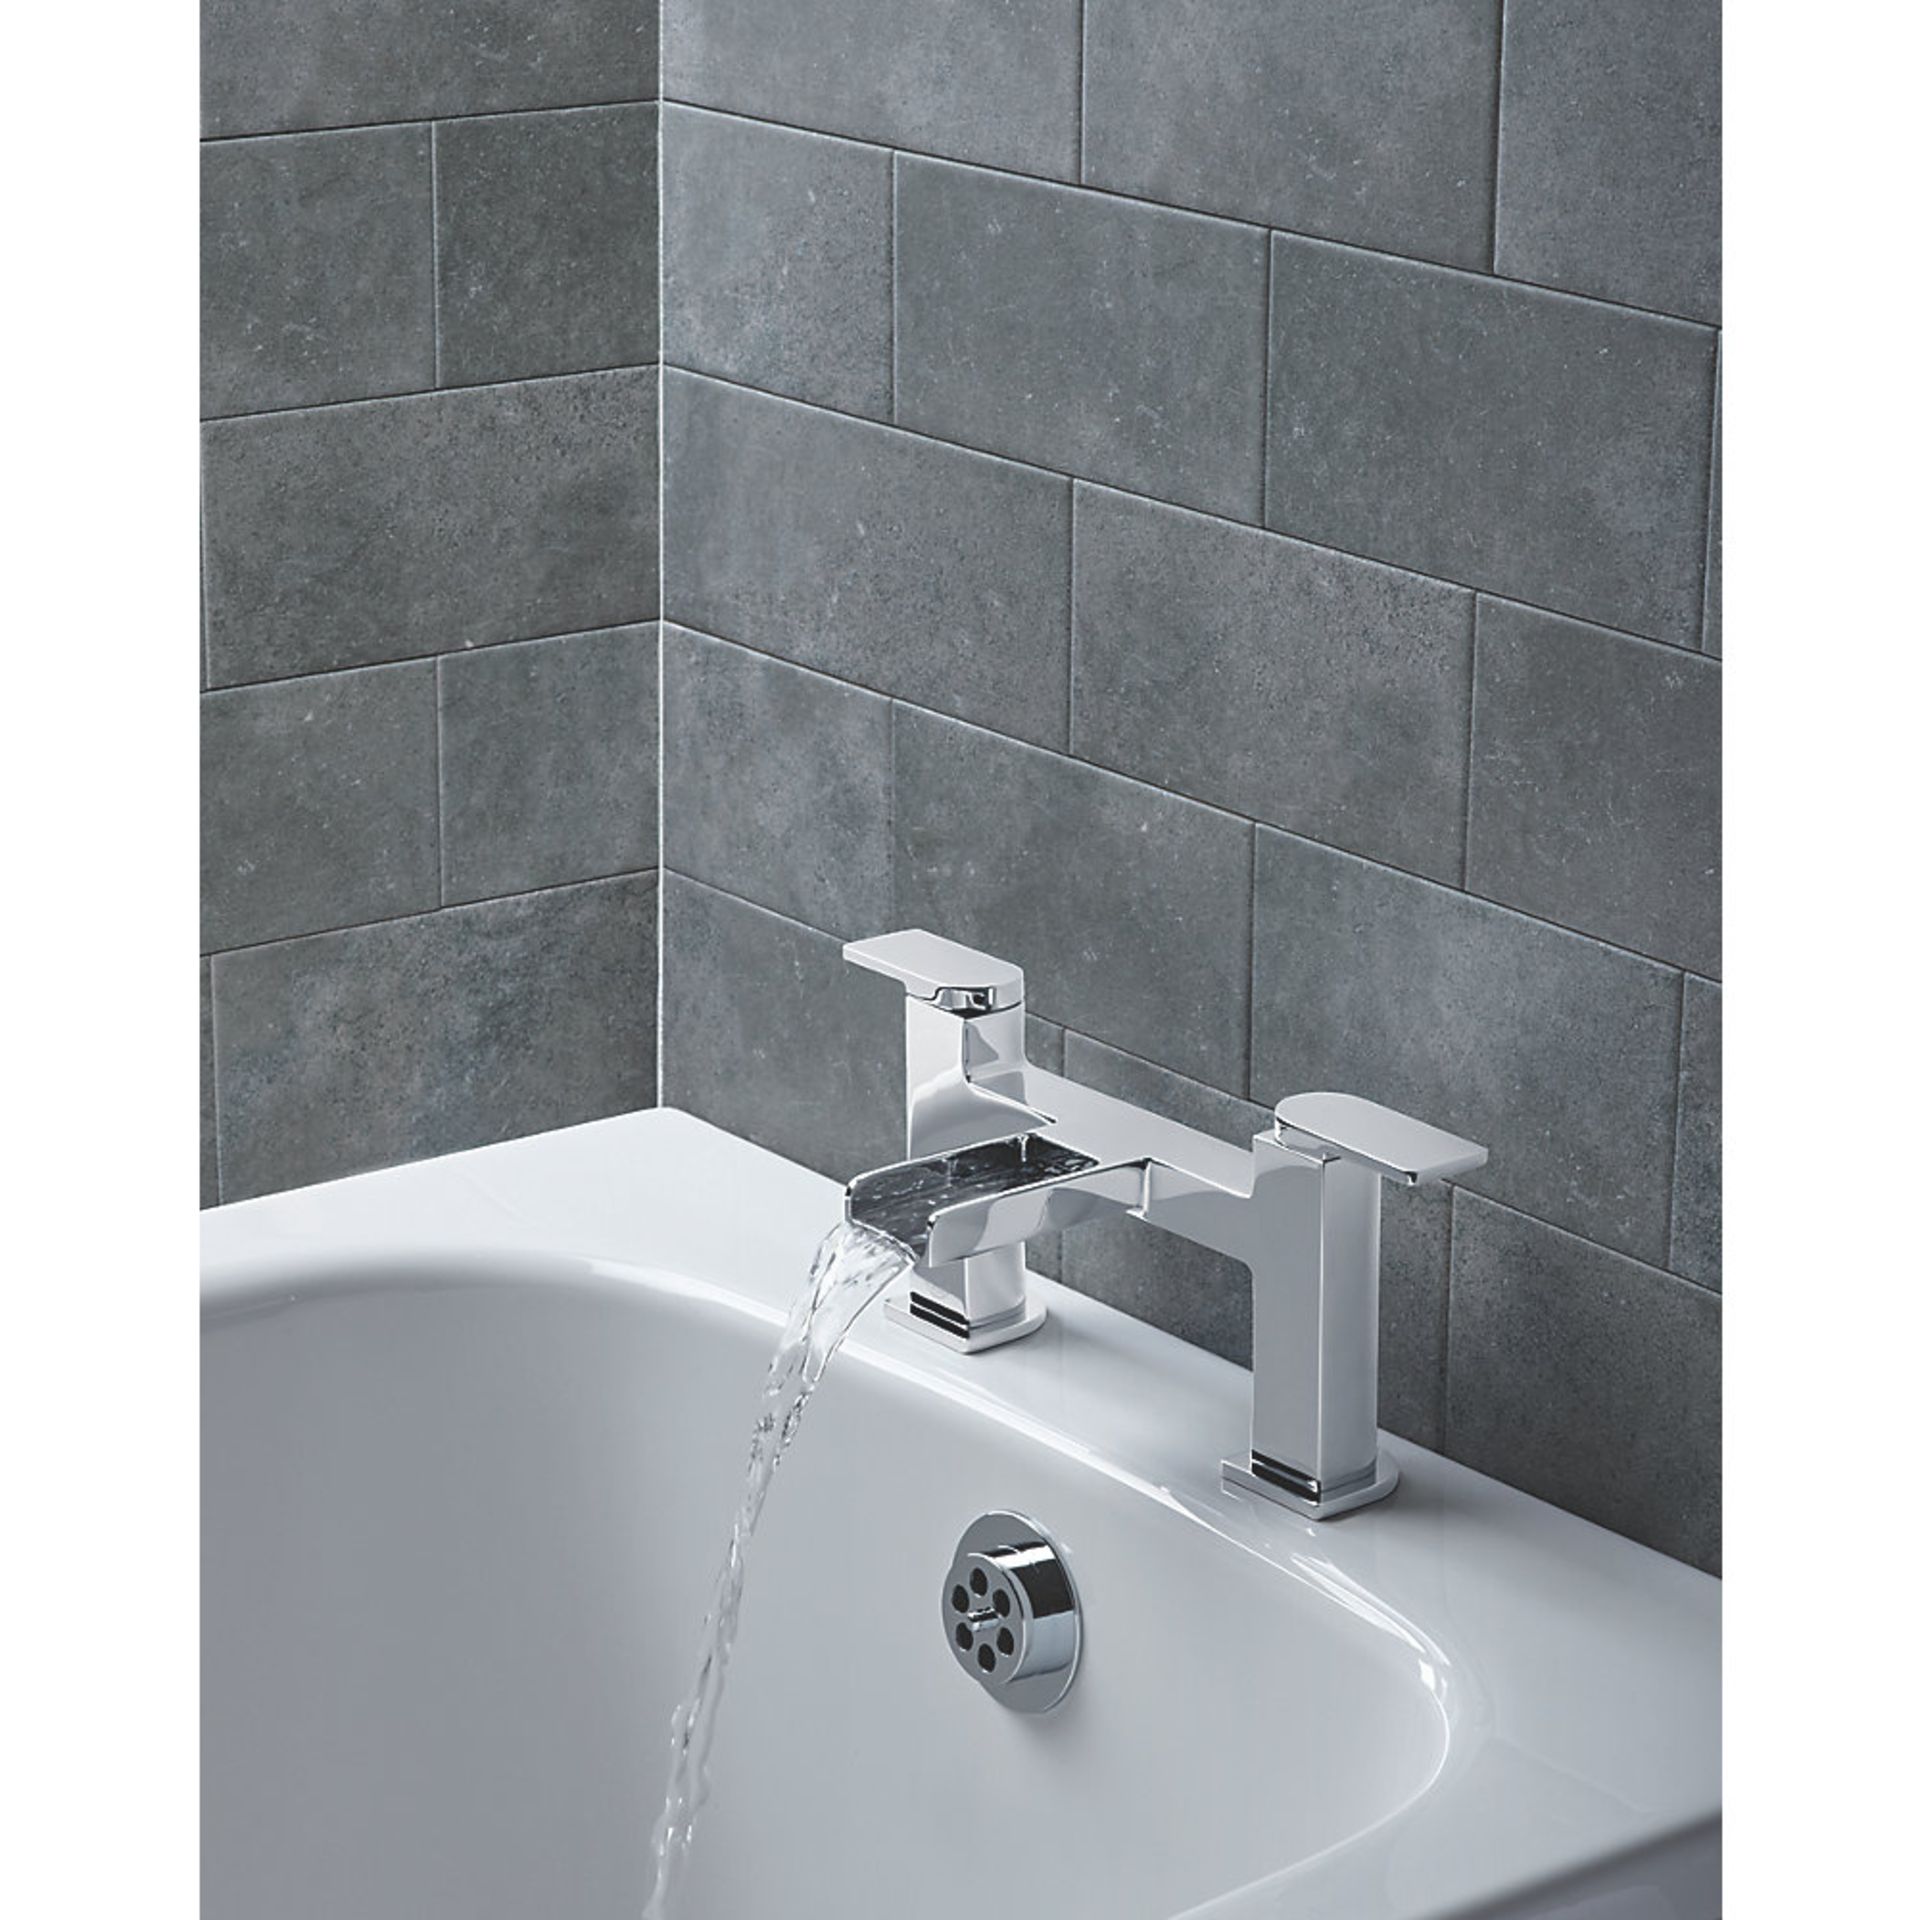 (MC148) Niagara Waterfall Bath Mono Mixer Tap. Double Lever Operation Suitable for High & Low